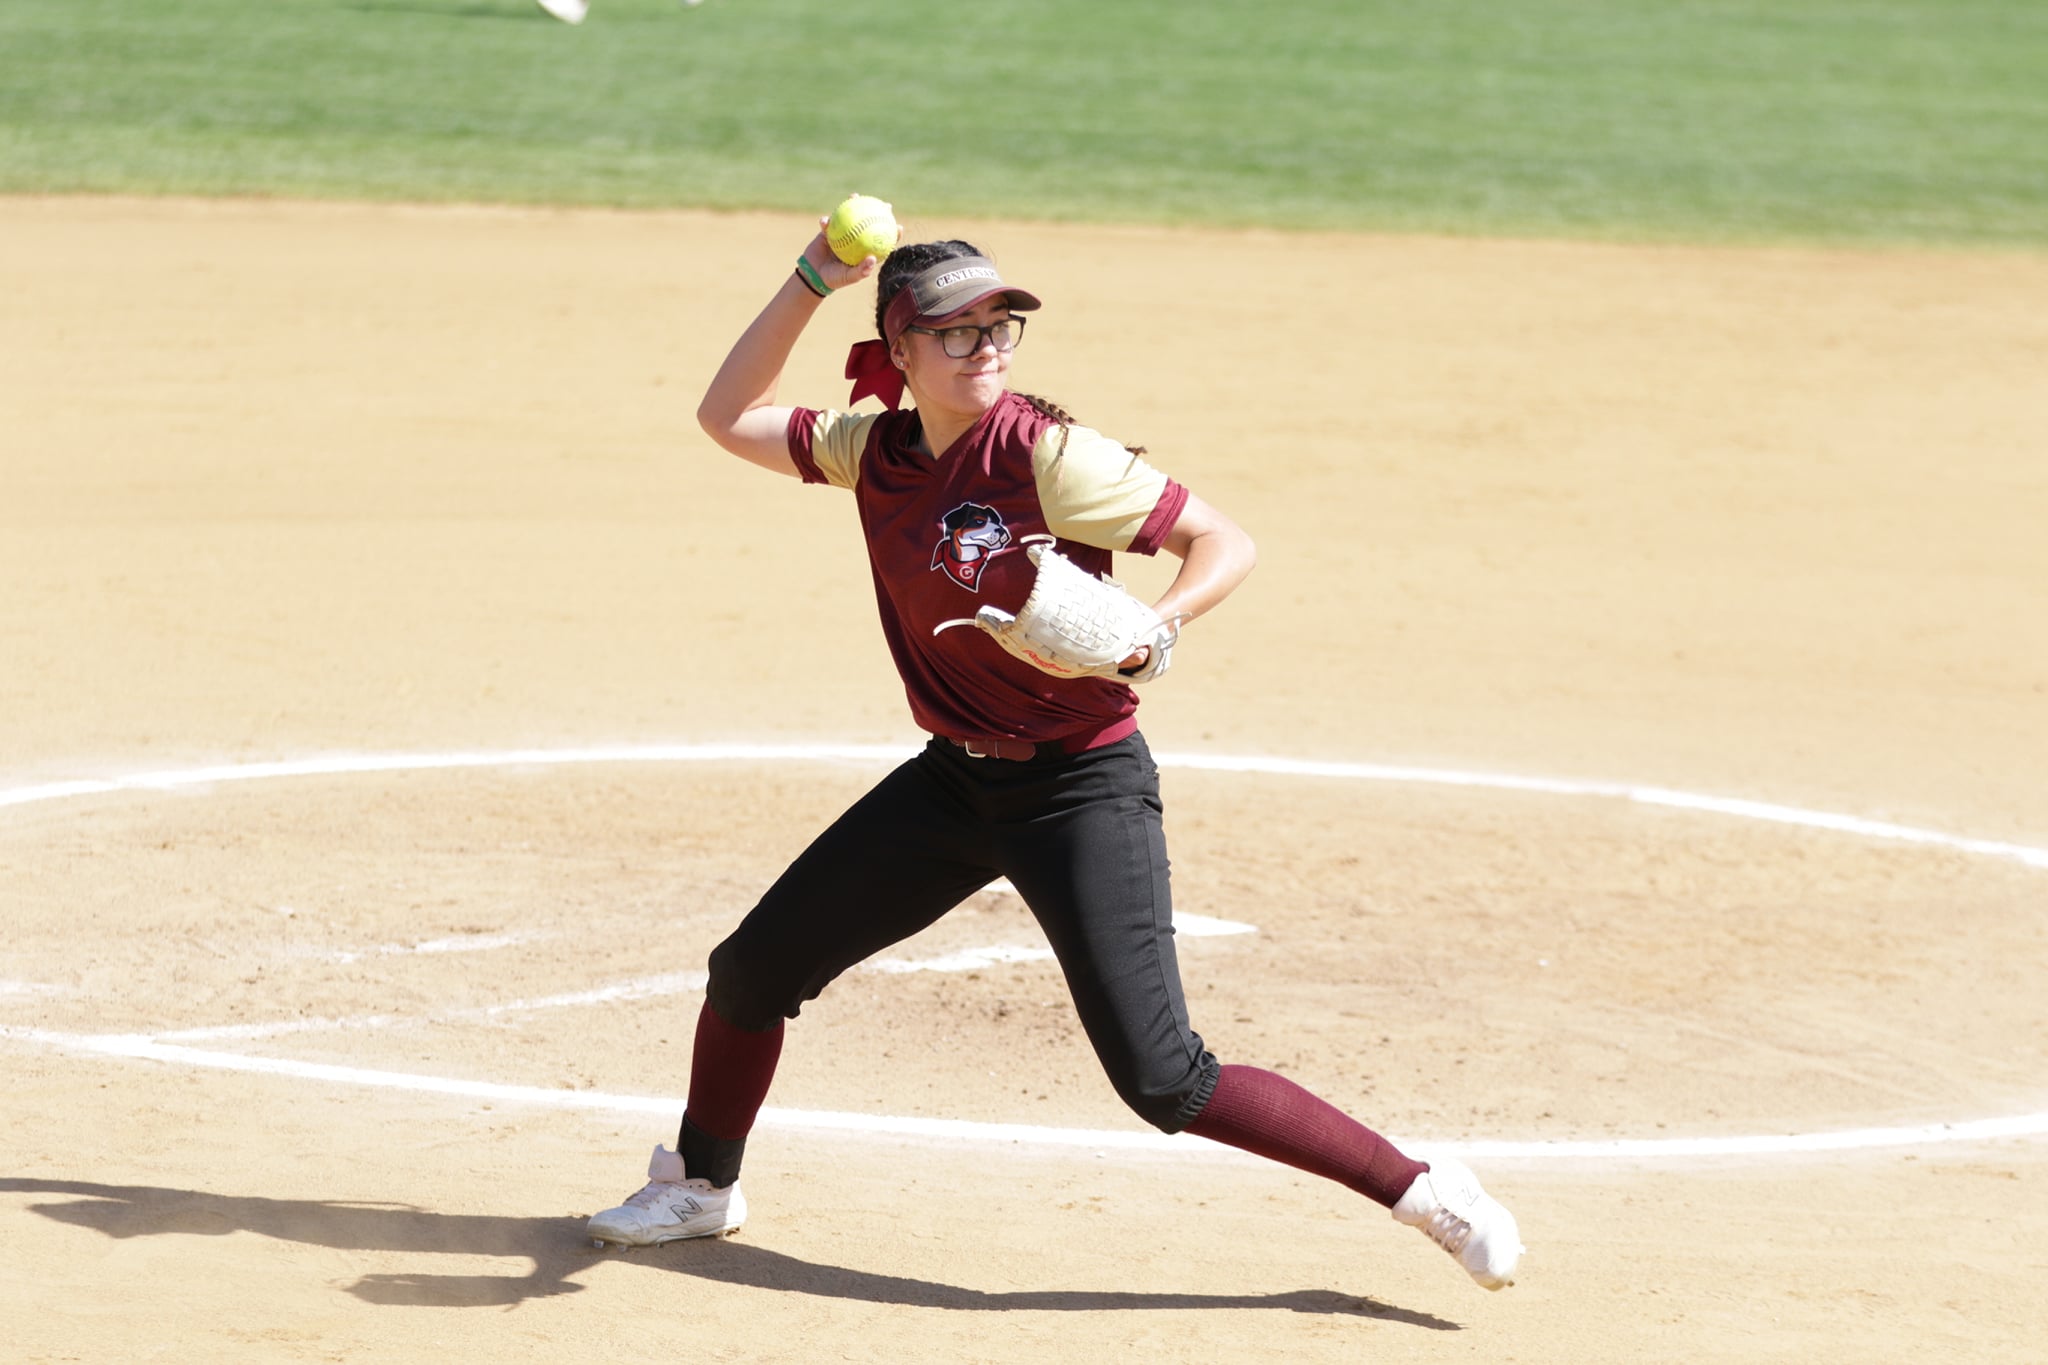 Ladies Fall In Slugfest To Austin College In Sunday's Series Finale, 12-11